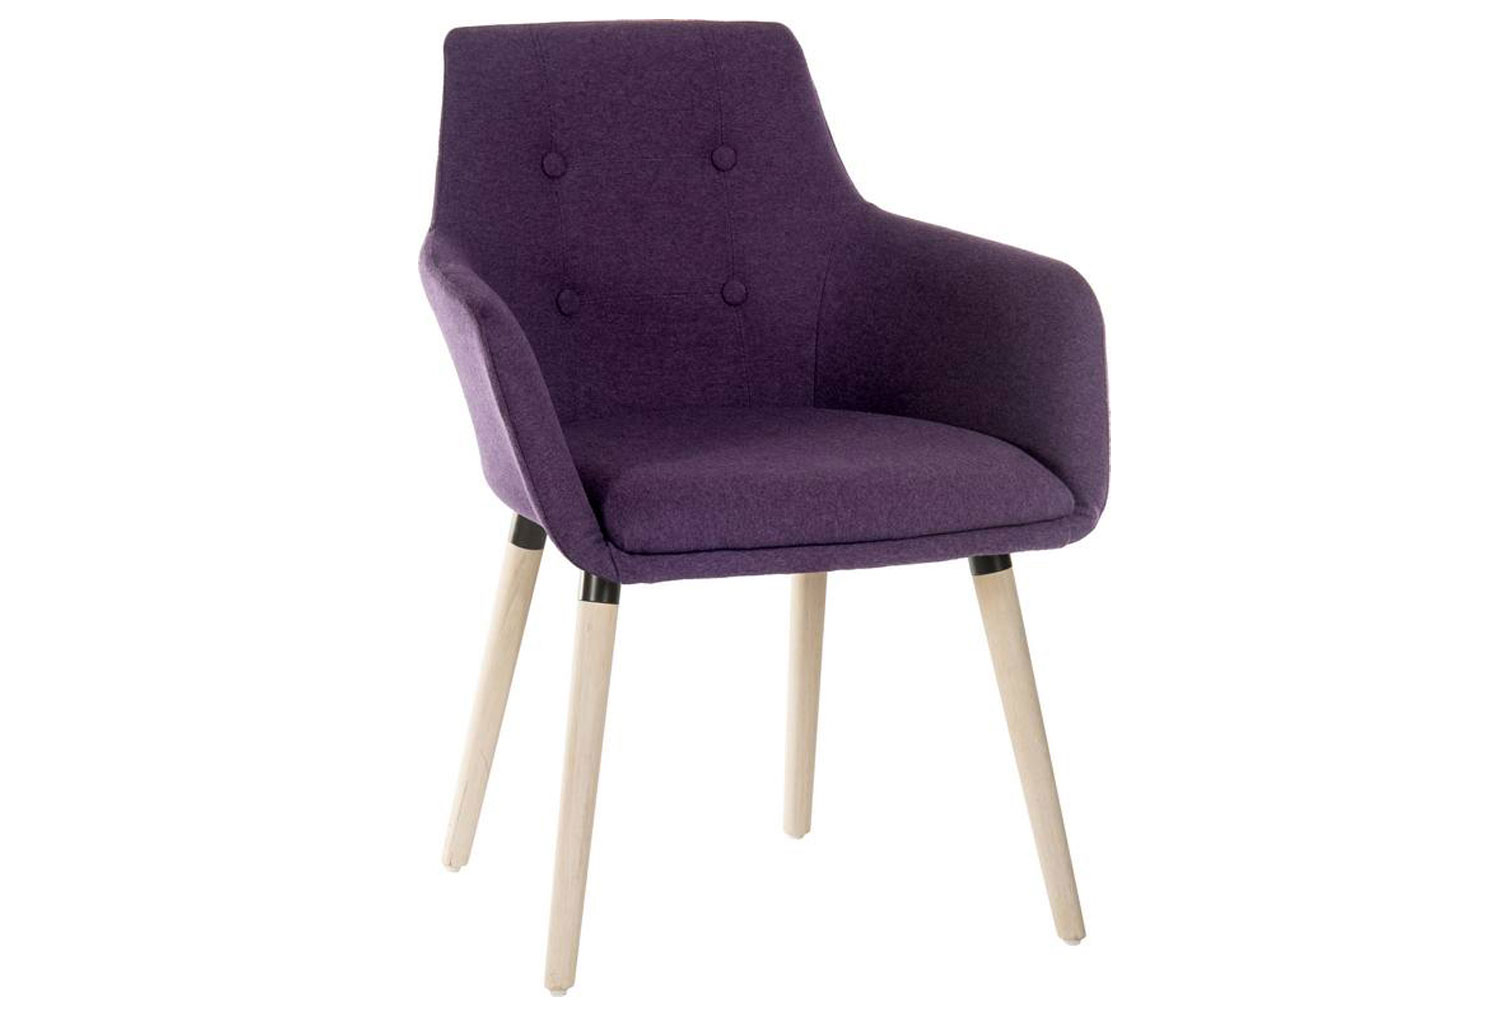 Pack Of 2 Puglia Breakout Chairs (Plum), Fully Installed